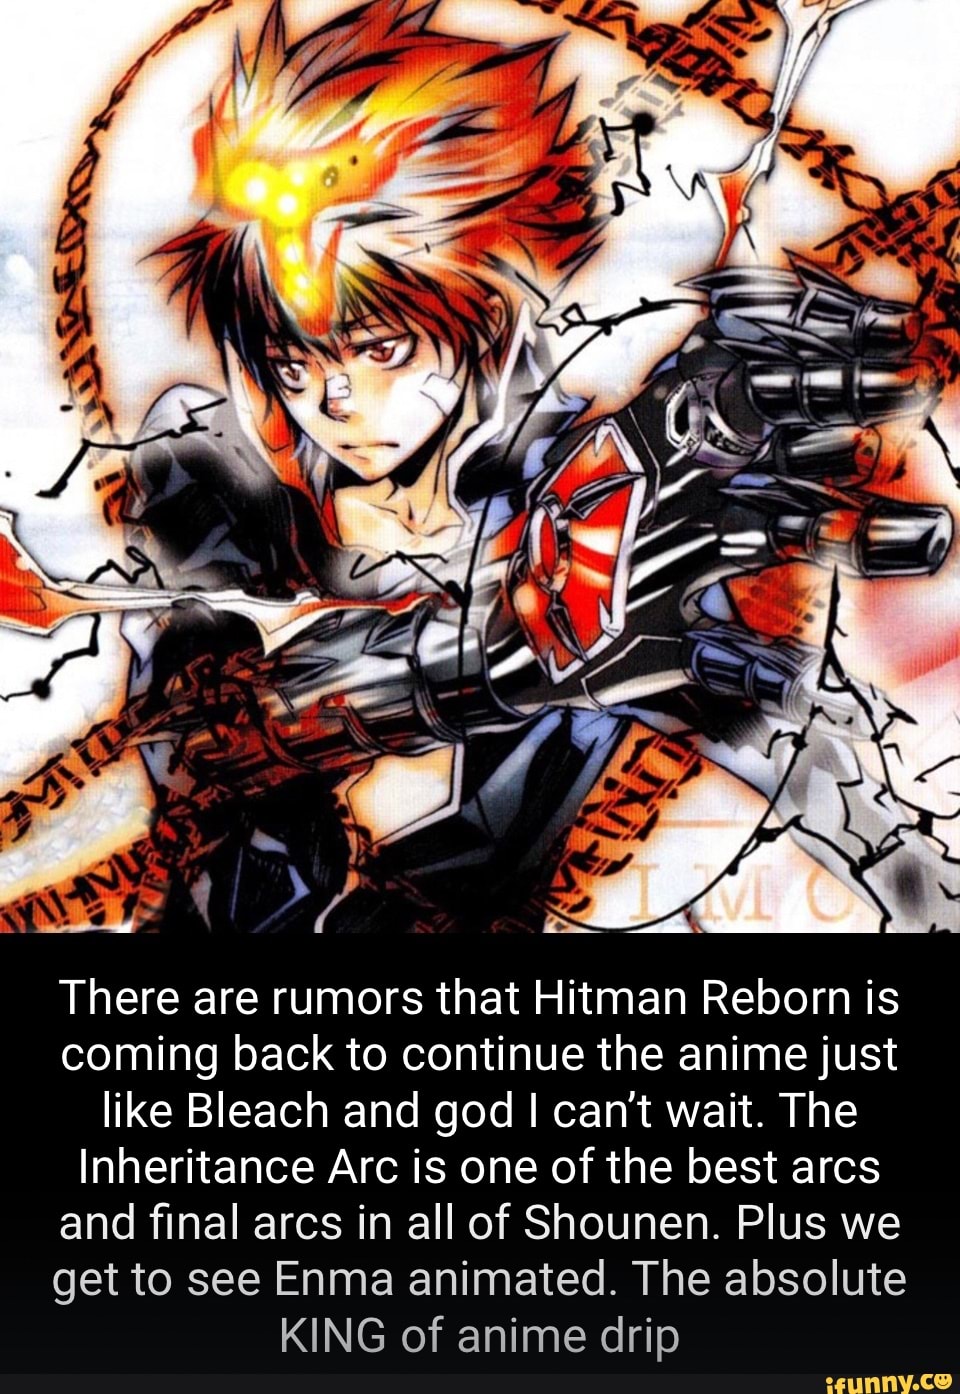 There are rumors that Hitman Reborn is coming back to continue the anime  just like Bleach